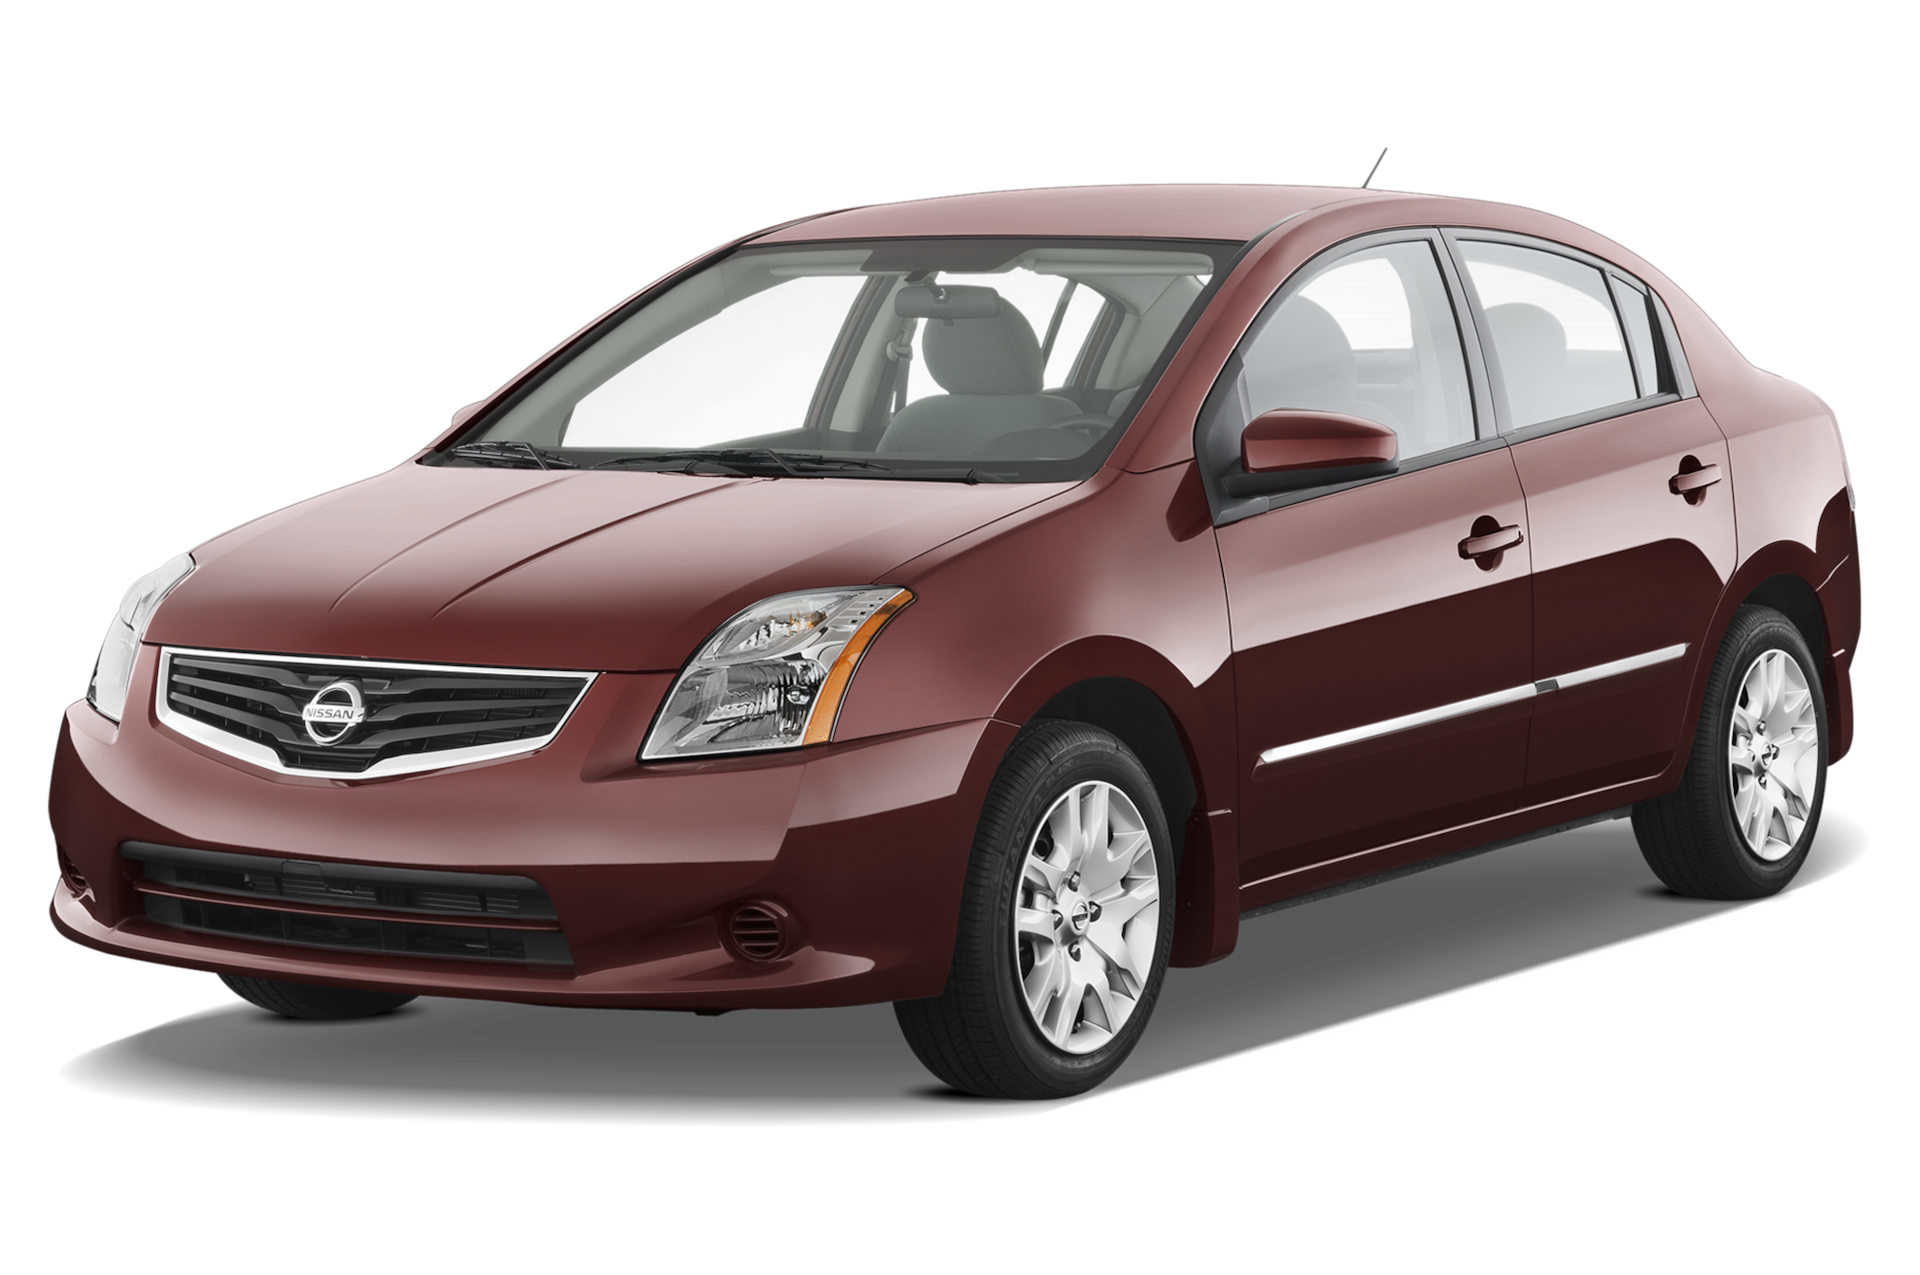 2010 Nissan Sentra Prices, Reviews, and Photos - MotorTrend